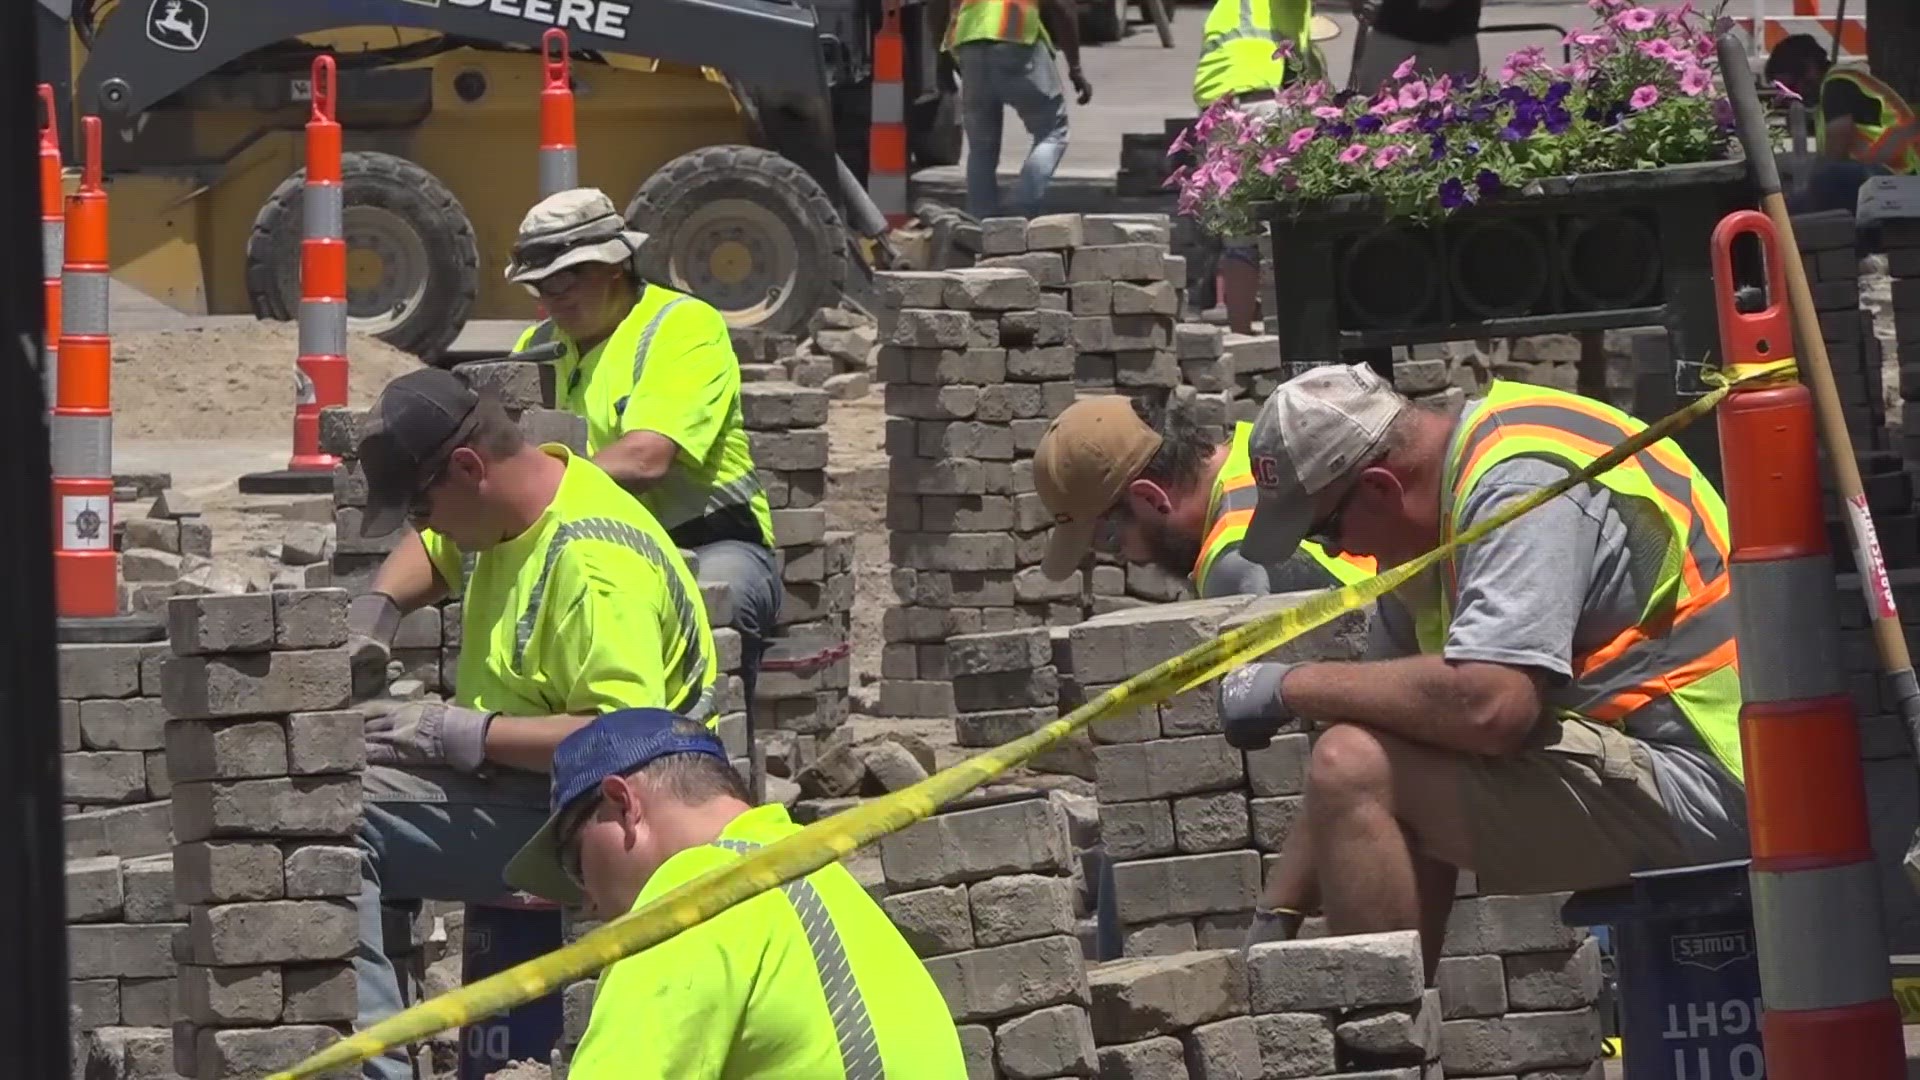 About 250 feet of bricks were displaced after a water main break on the north stretch of Historic Main Street. Work is underway to put them back where they belong.